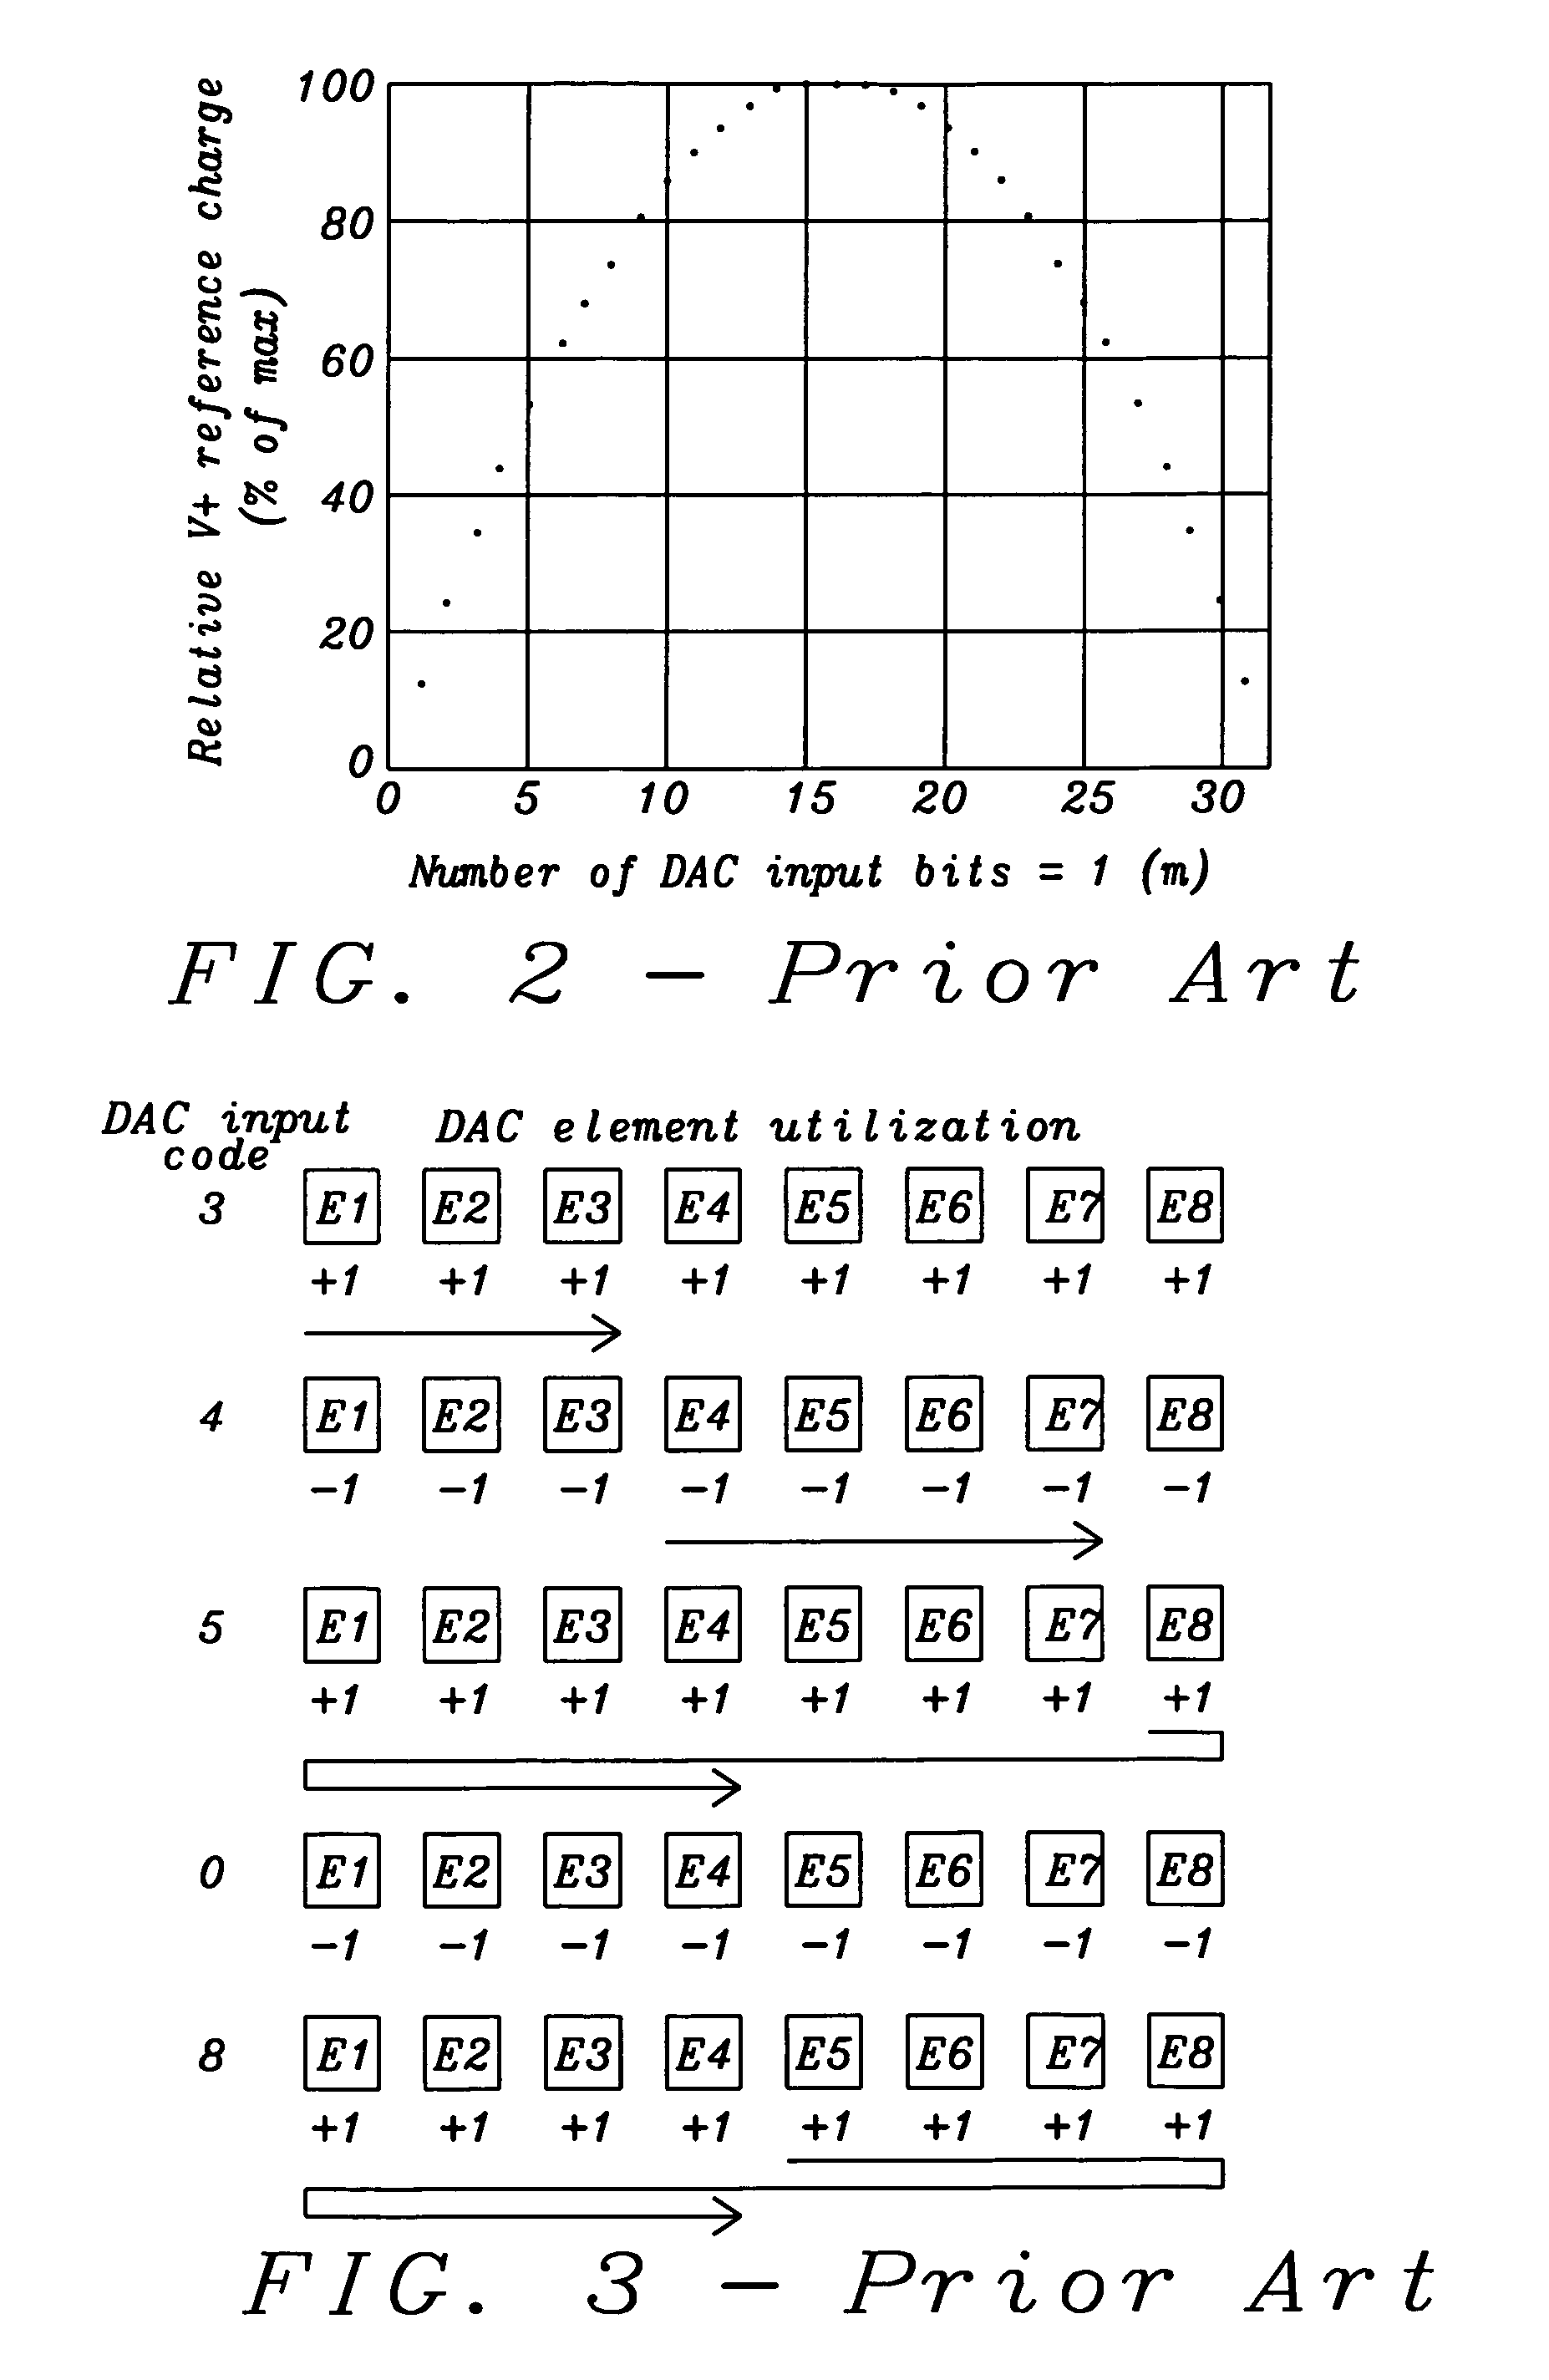 Tri-level dynamic element matcher allowing reduced reference loading and DAC element reduction